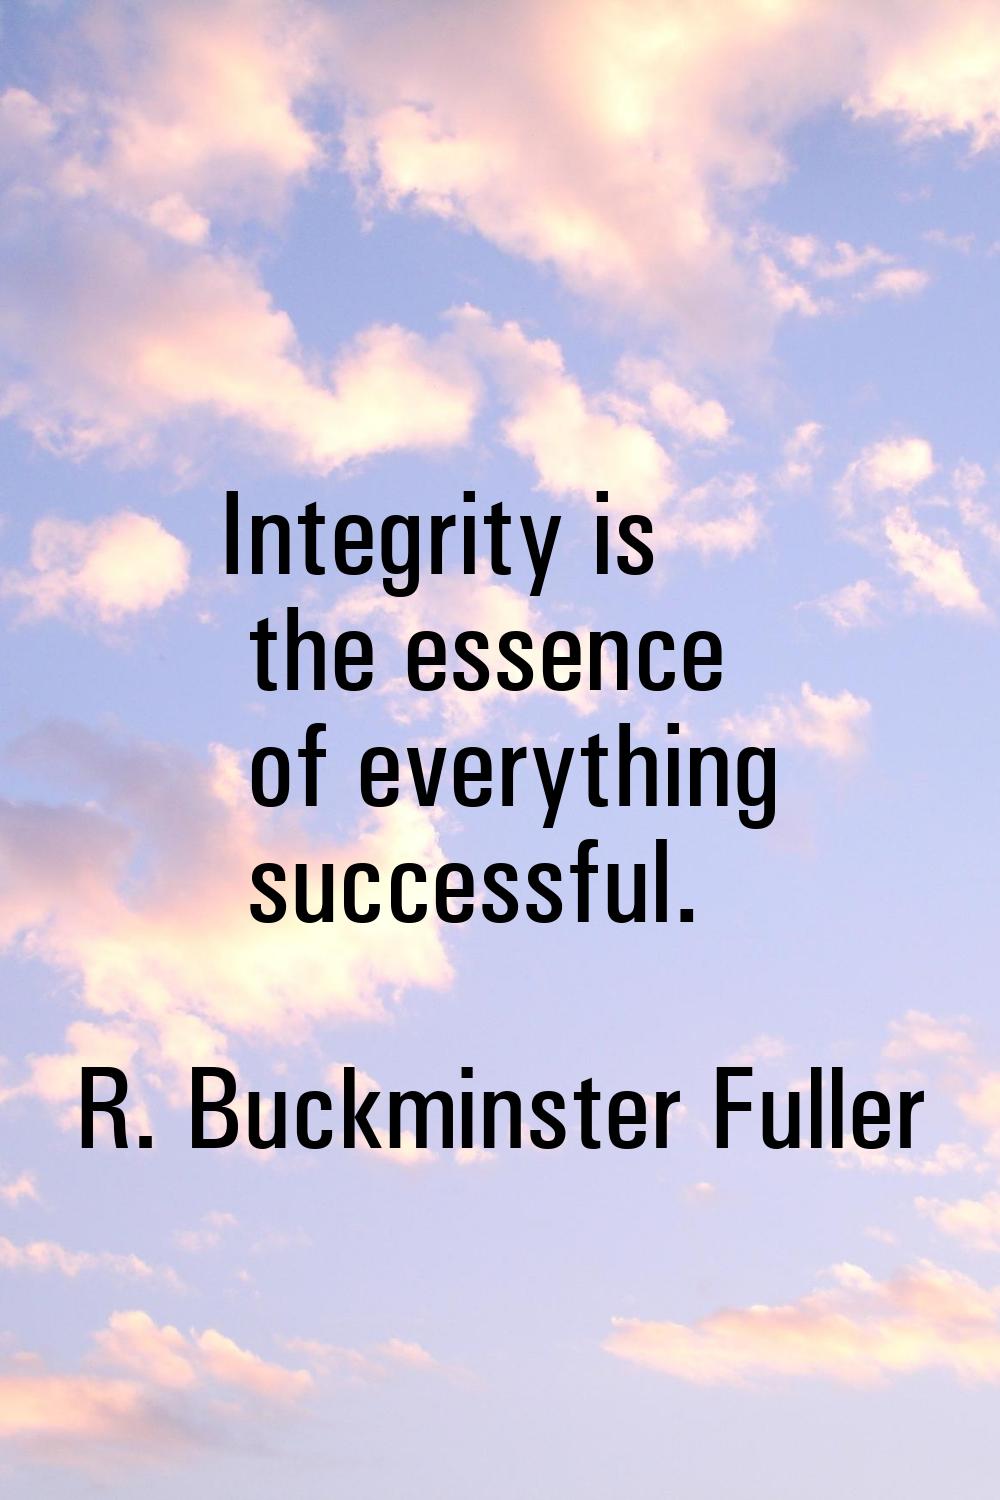 Integrity is the essence of everything successful.